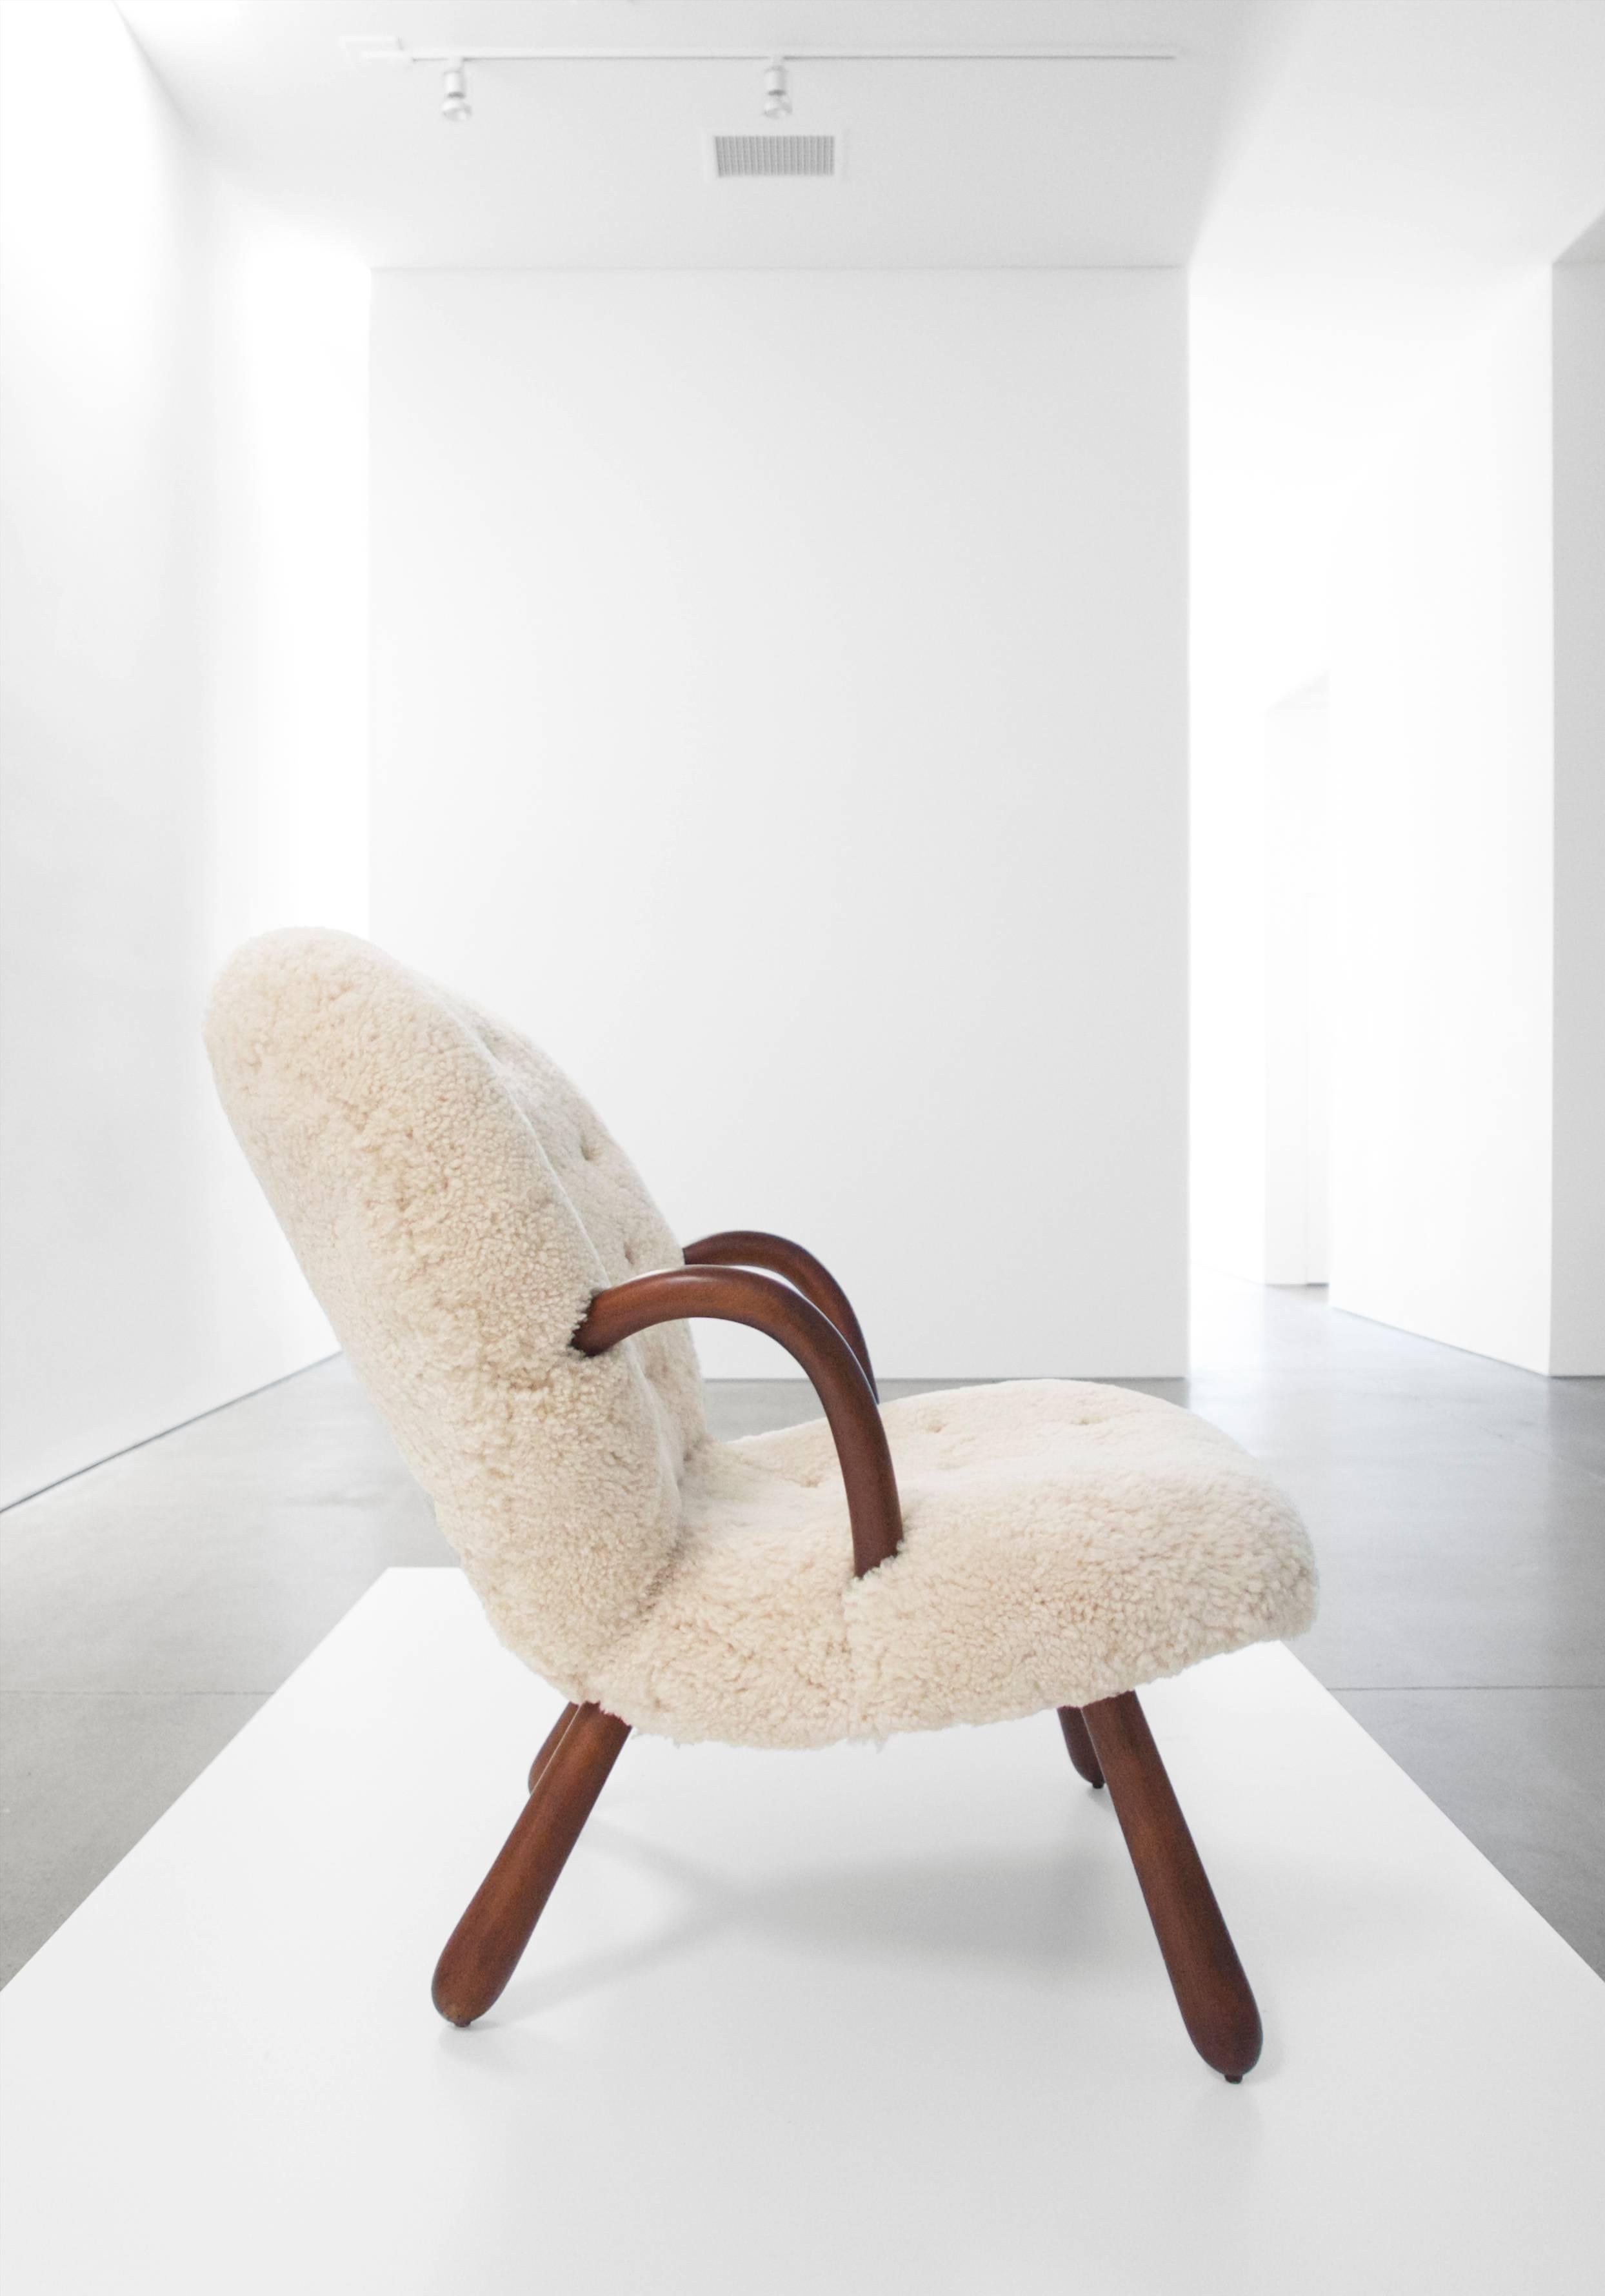 Philip Arctander "Clam" chair with legs of birch, upholstered in sheepskin.
    
    